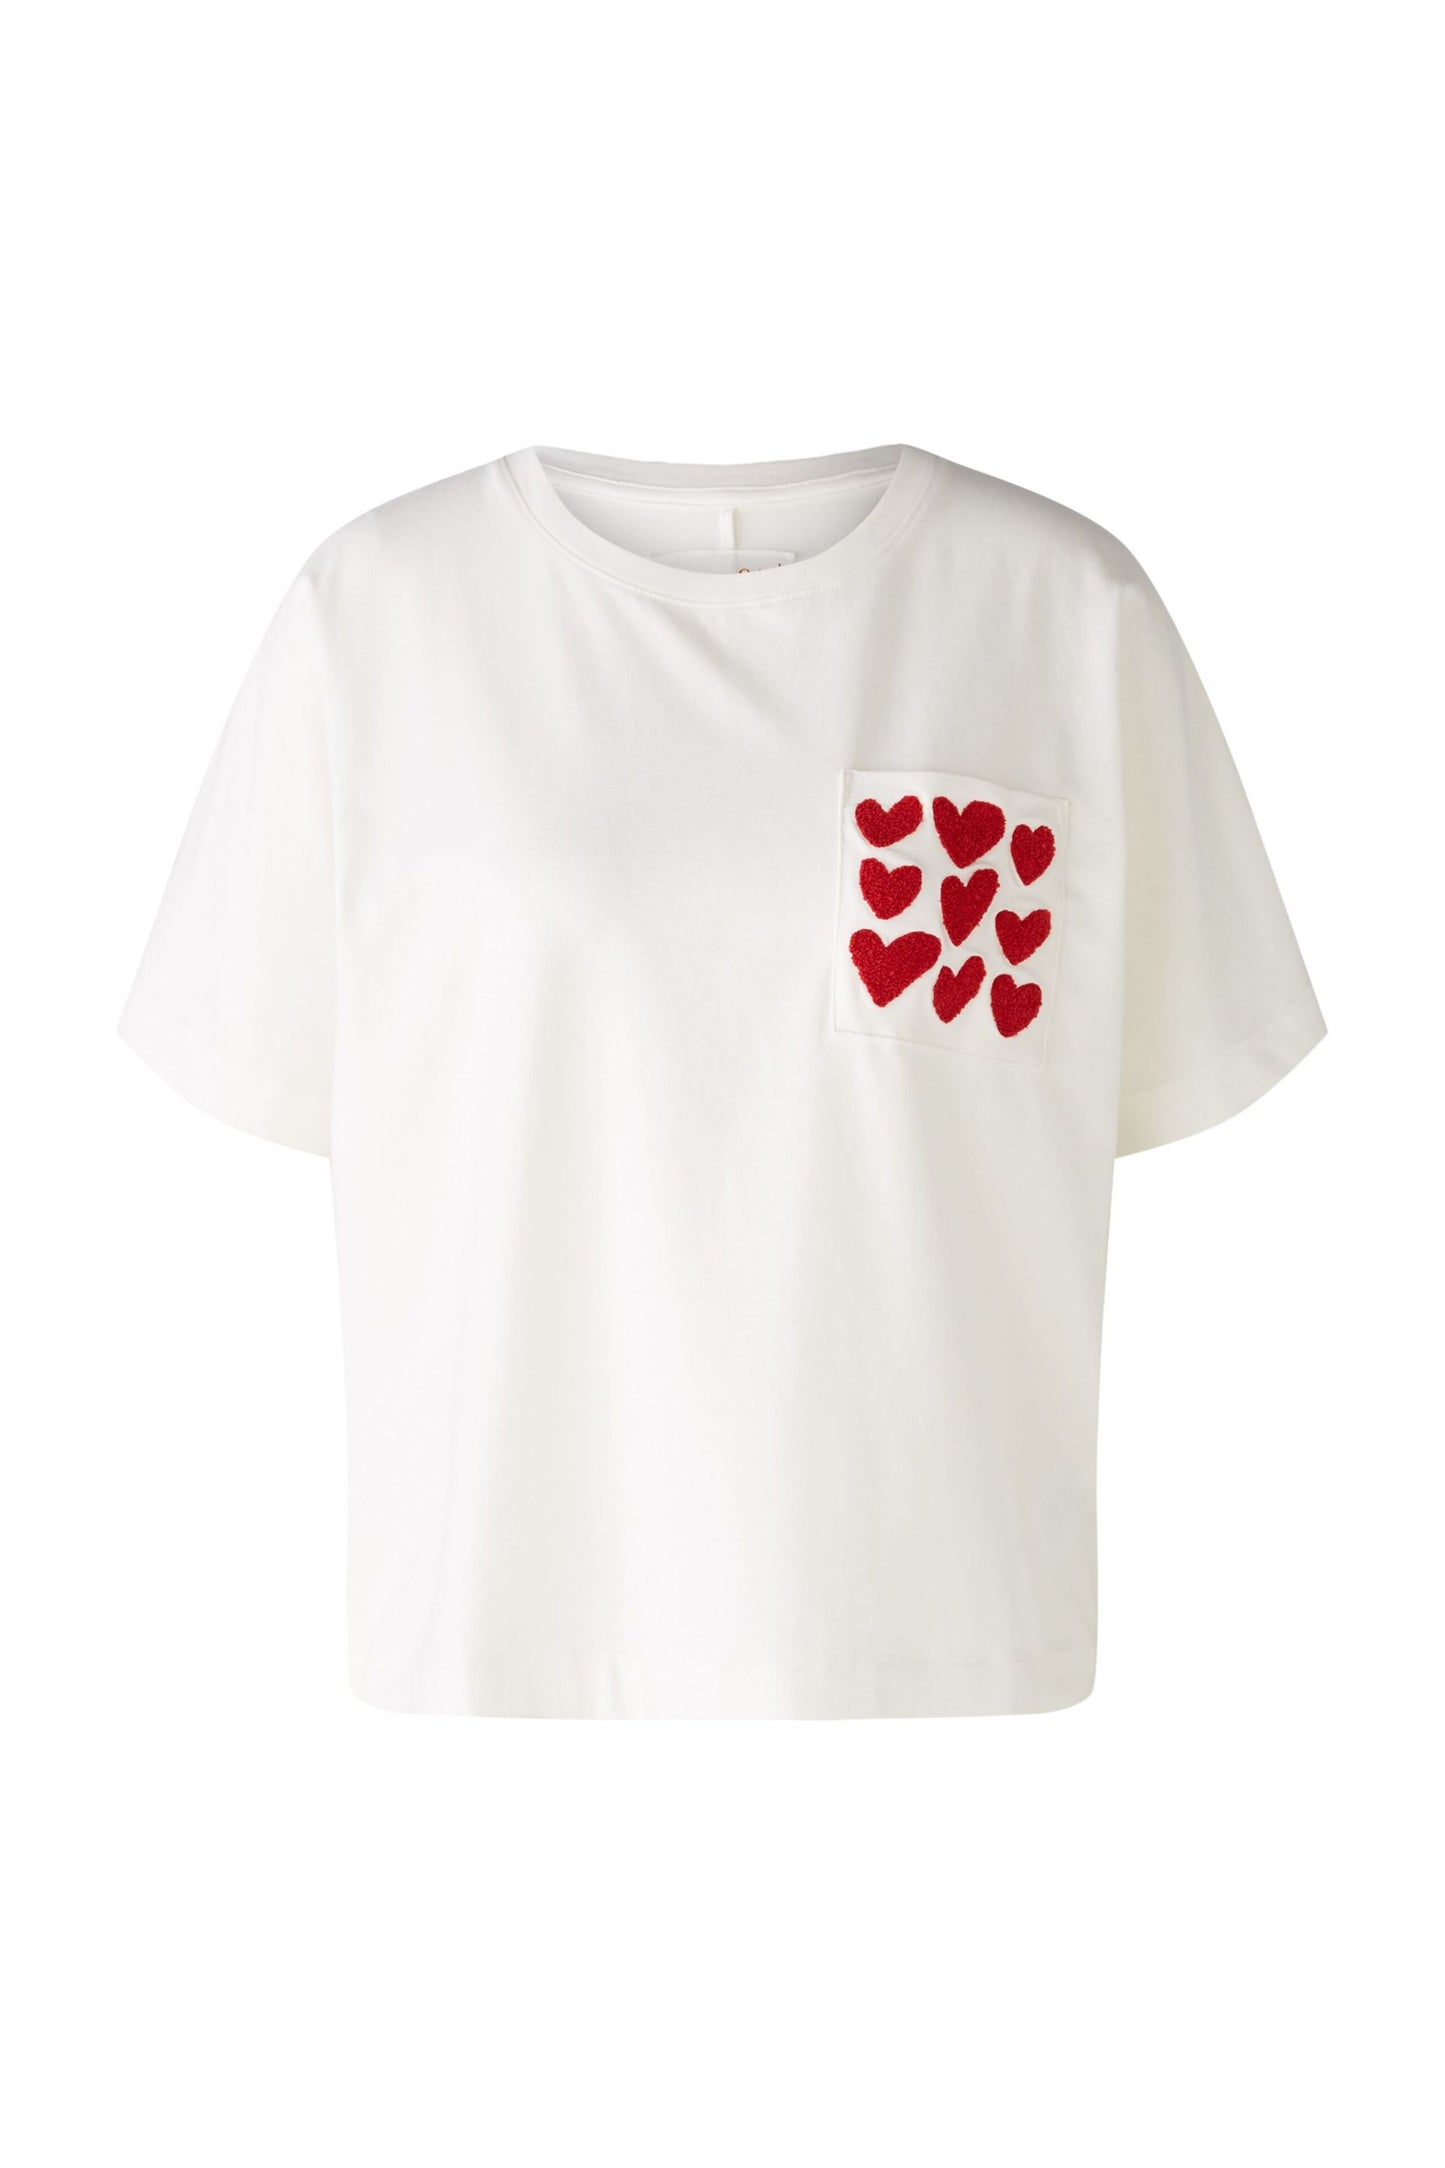 Oui T-shirt with Heart Pocket Detail 86759